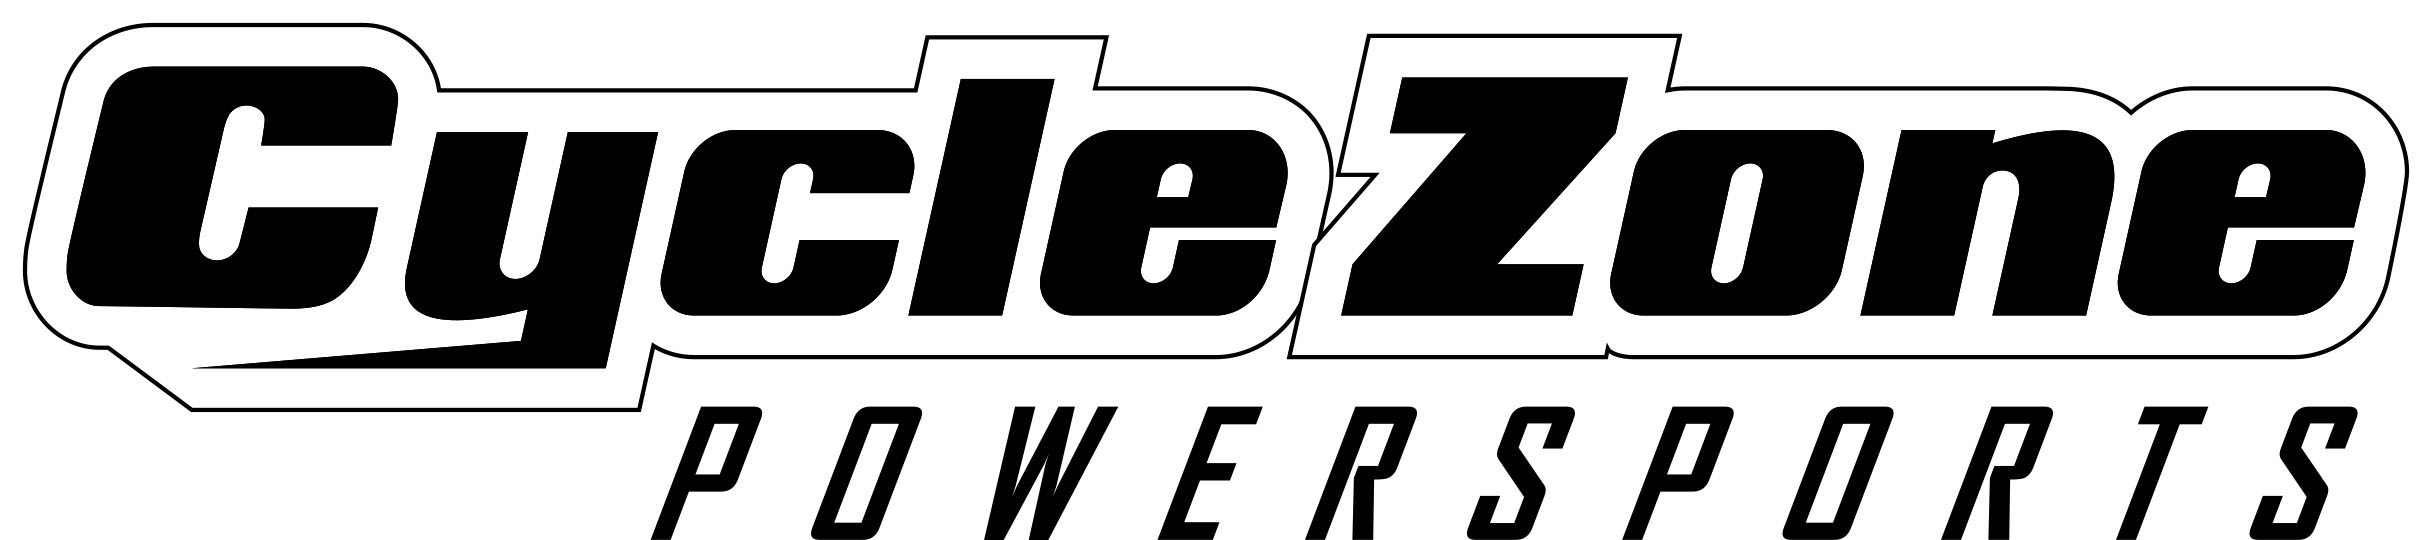 CycleZone_PowerSports_Vector